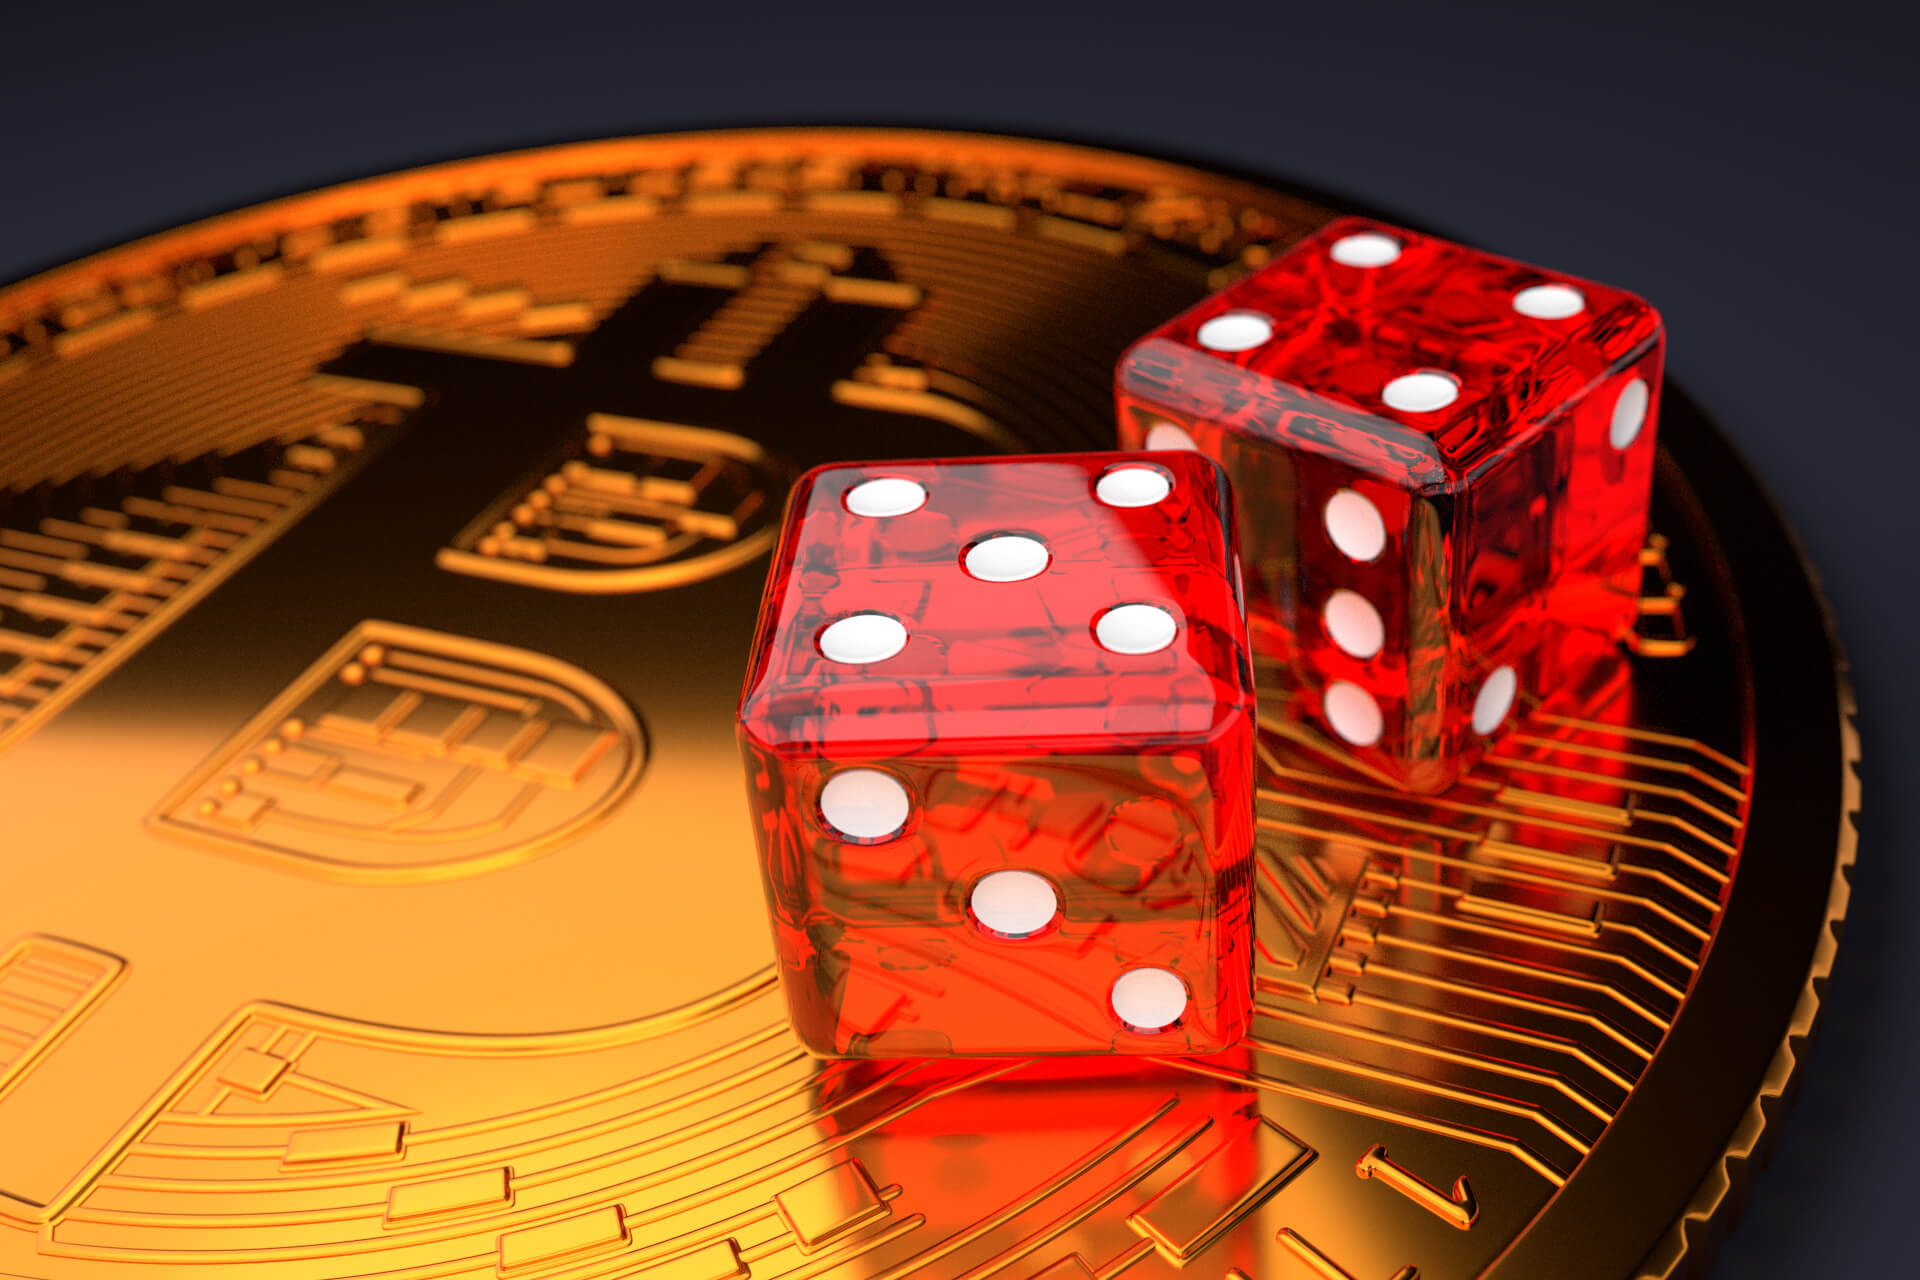 1. Overview of Online Casino Operations